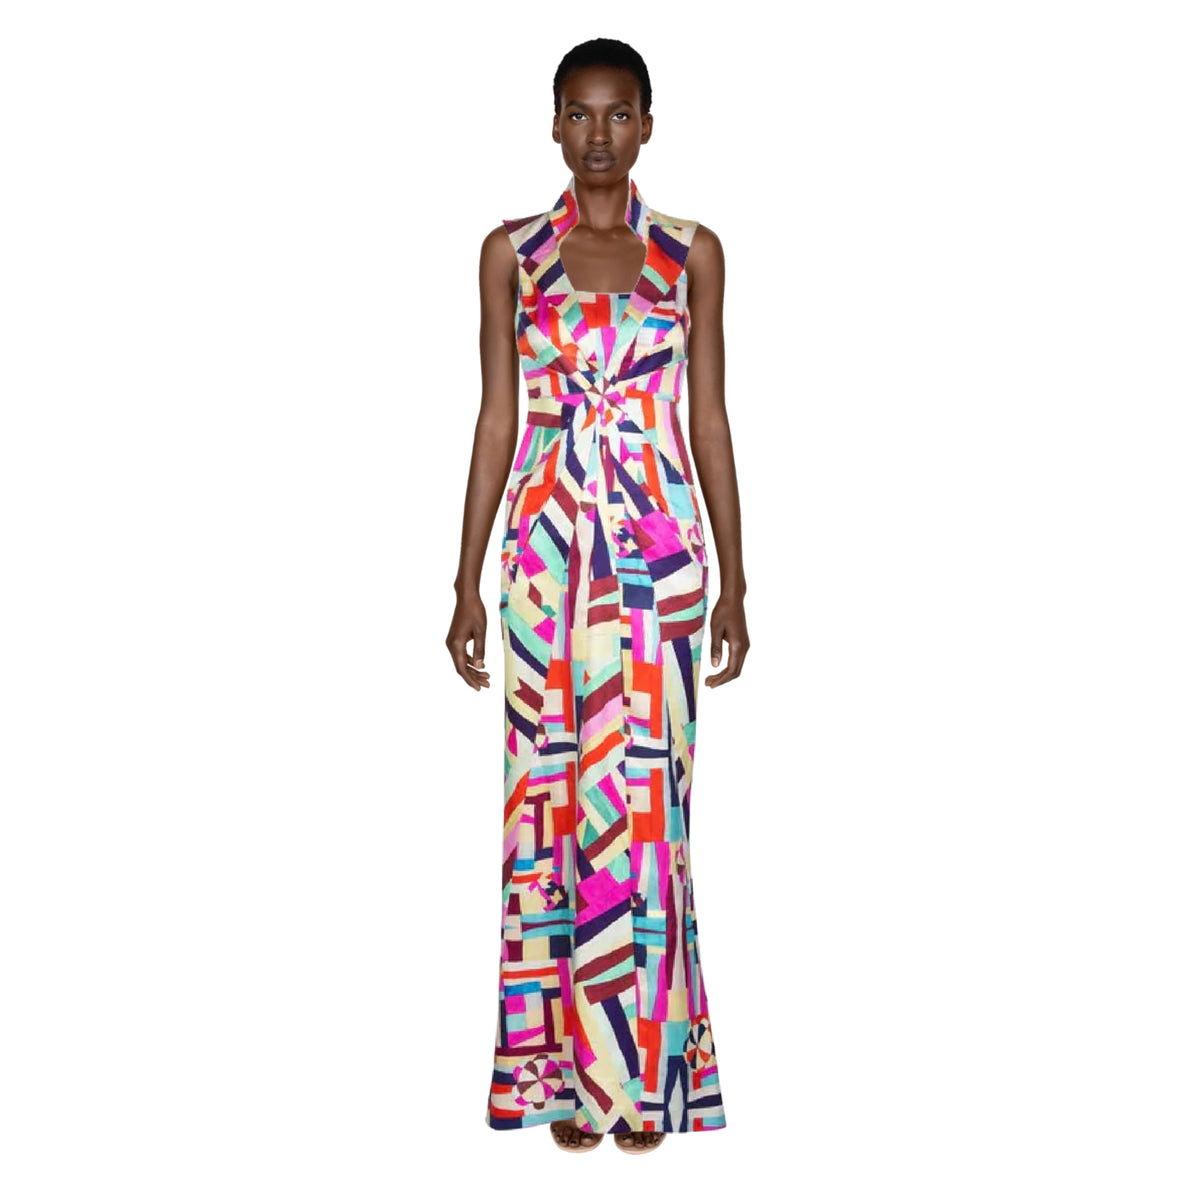 Chanel New Multicolored Print Cut Out Back Maxi Dress | Size 34 FR